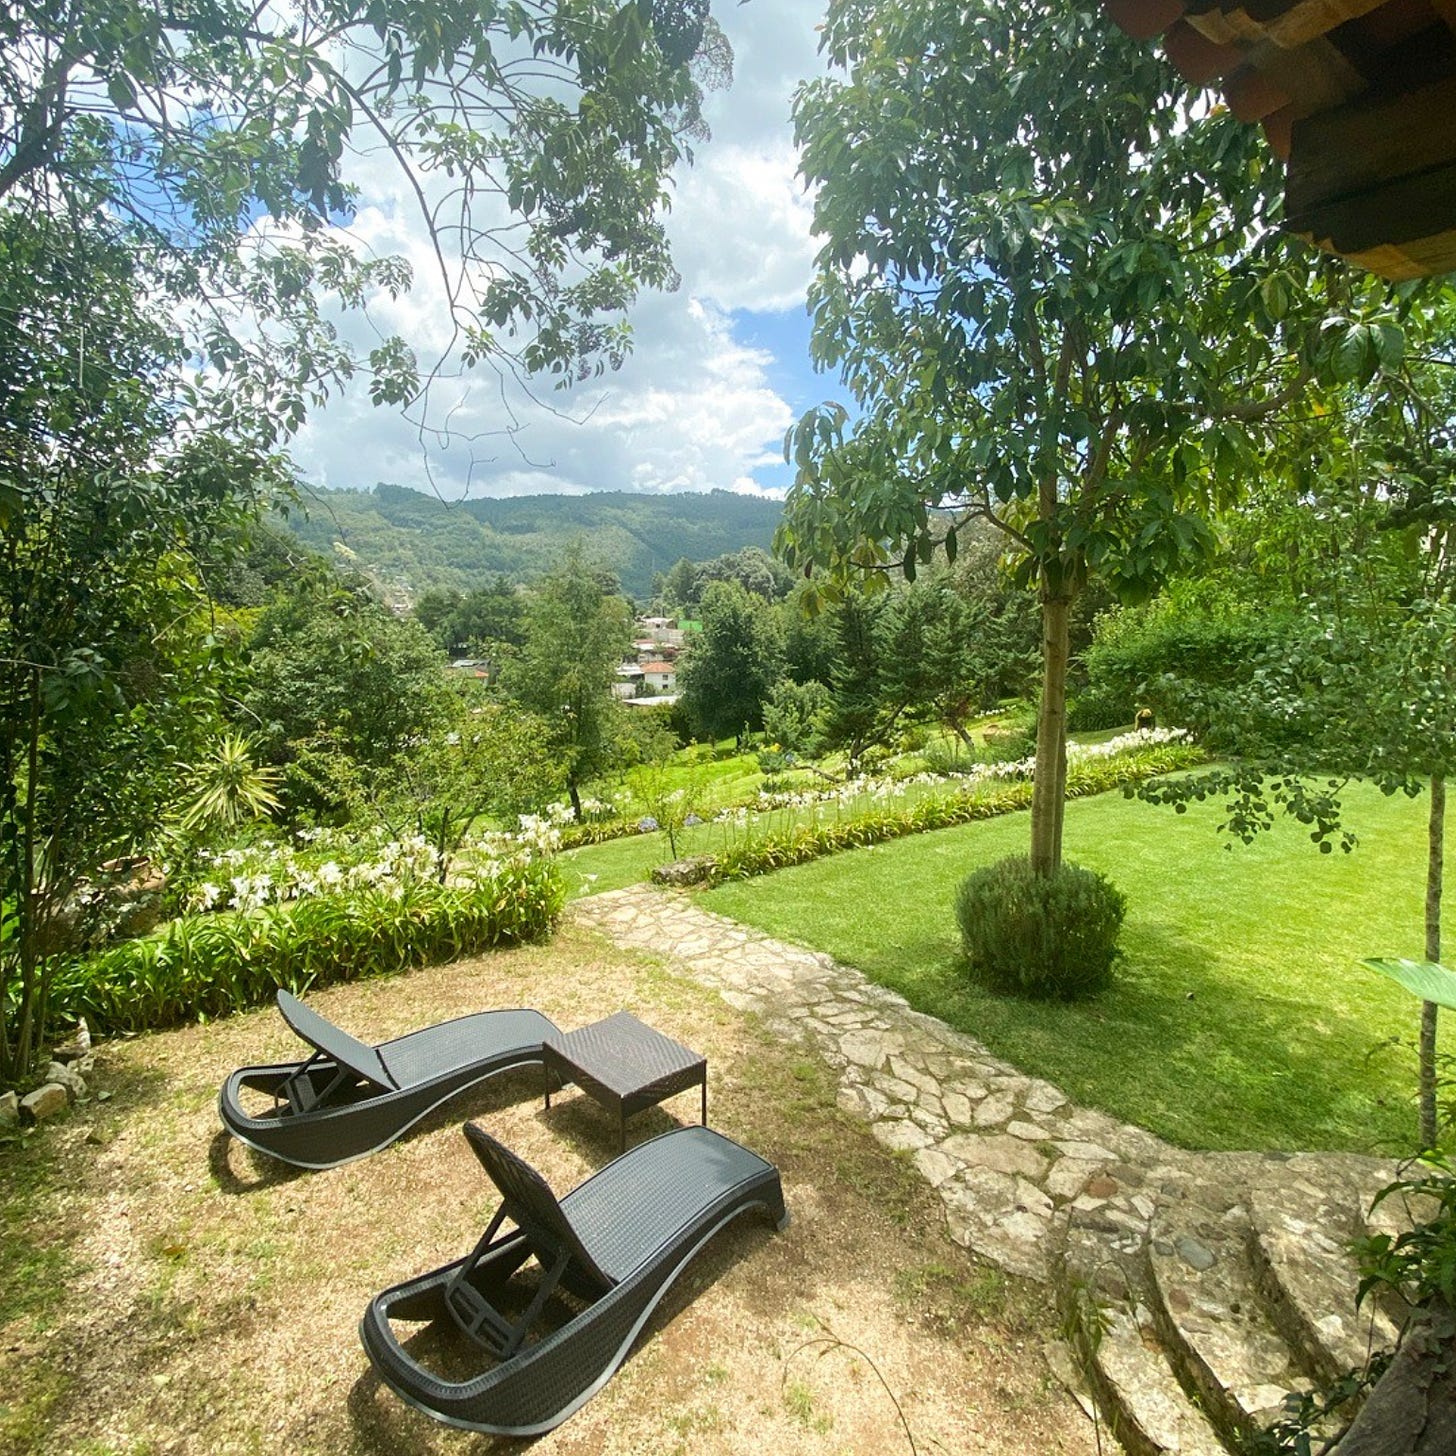 Two outside lounge chairs on grass near stone steps and a walkway outside in the green, wooded hillside of Chiapas in Mexico. The sky is blue with some fluffy white clouds and green mountain in the distance.